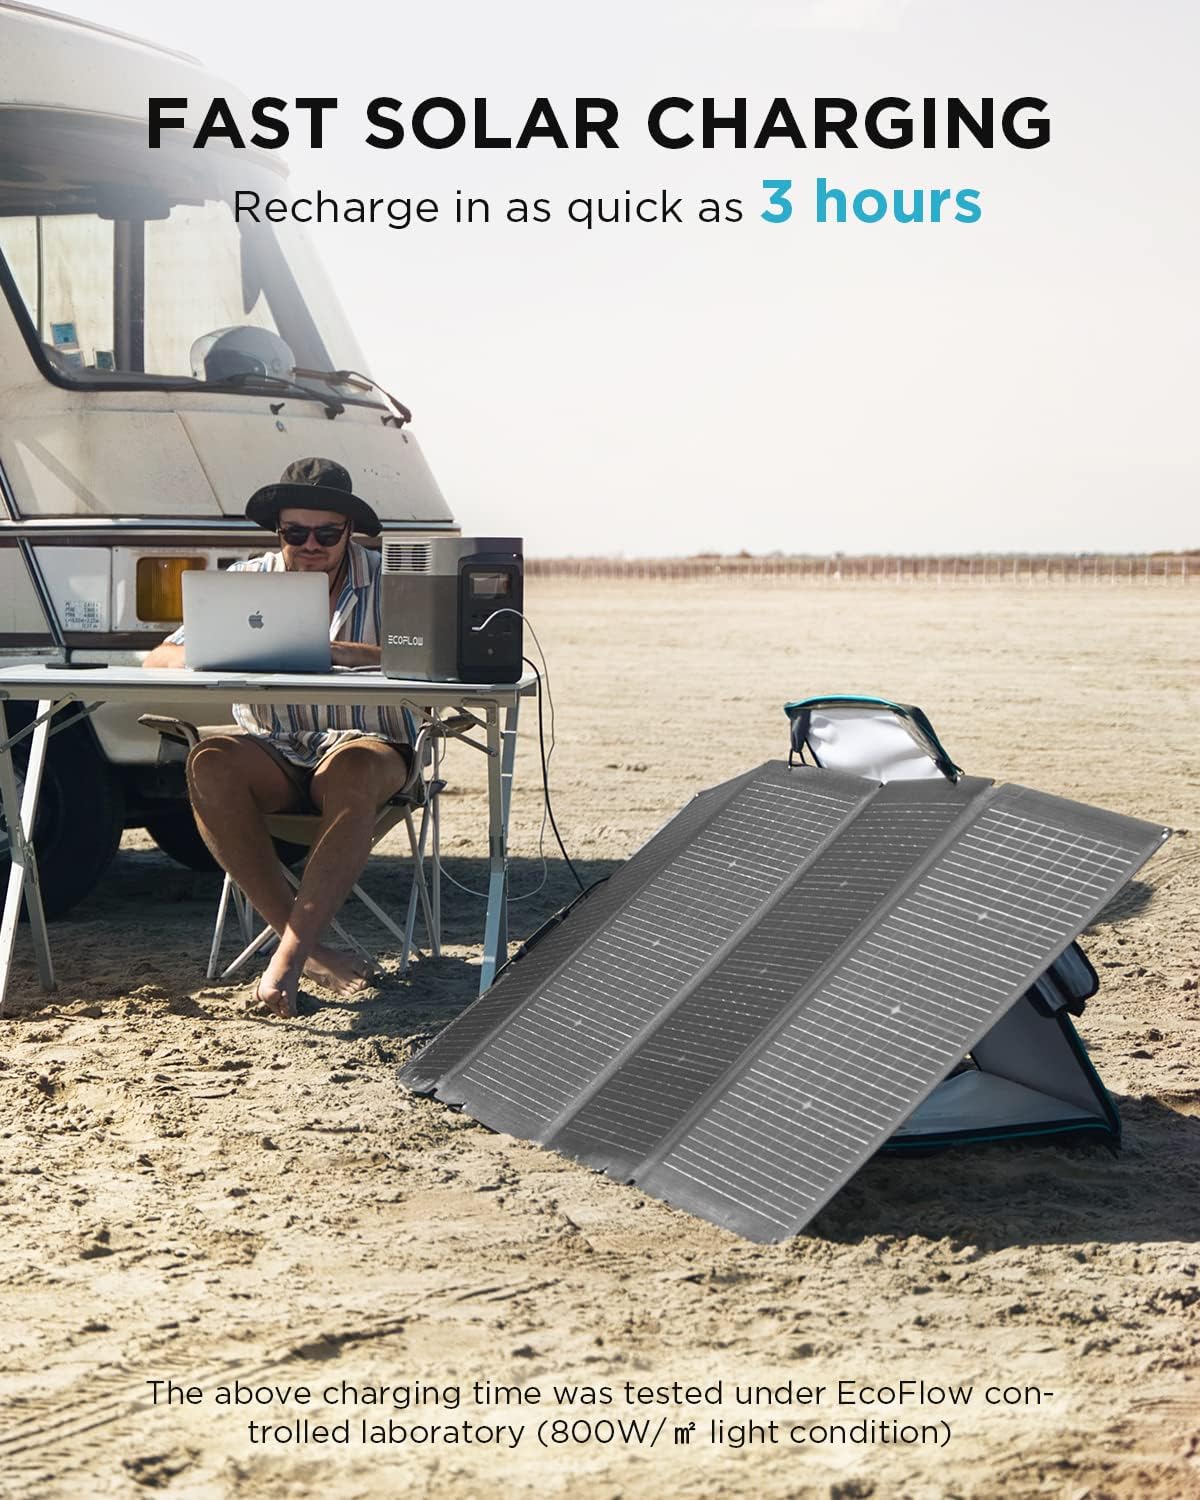 Portable Power Station DELTA 2, 1024Wh Lifepo4 (LFP) Battery, Fast Charging, Solar Generator(Solar Panel Optional) for Home Backup Power, Camping & Rvs